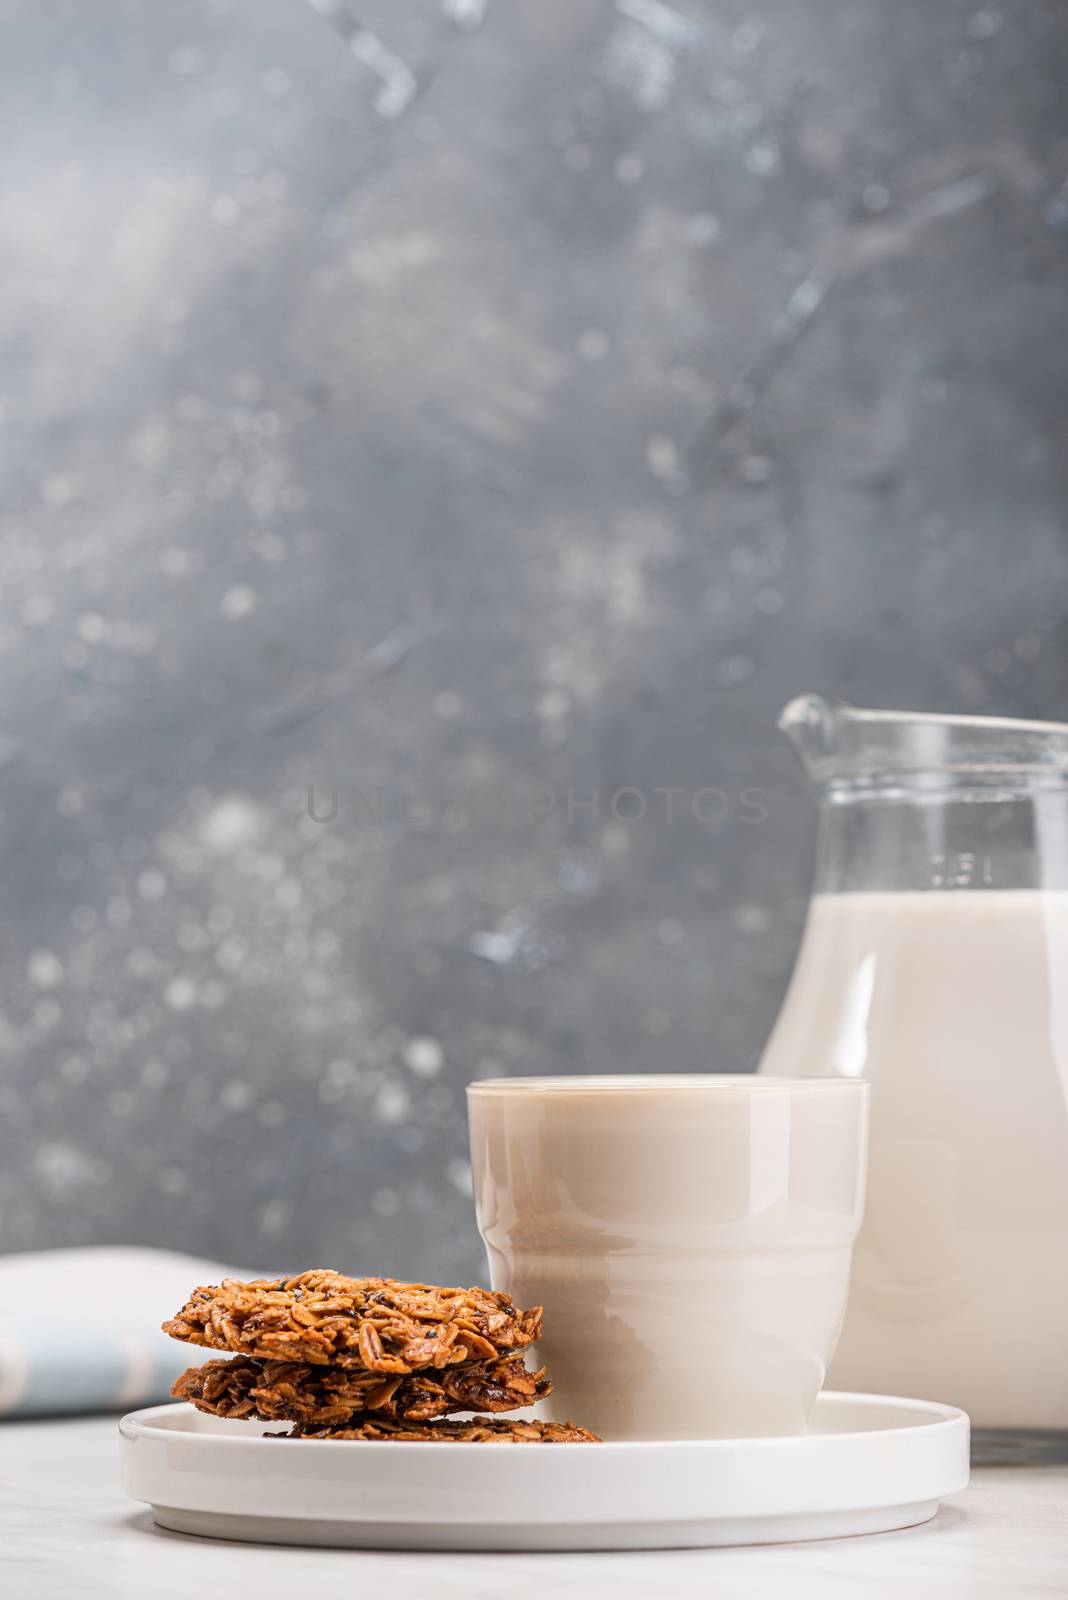 Soy or Soya Milk and Oat Cookies on Kitchen Table. Plant Based V by merc67